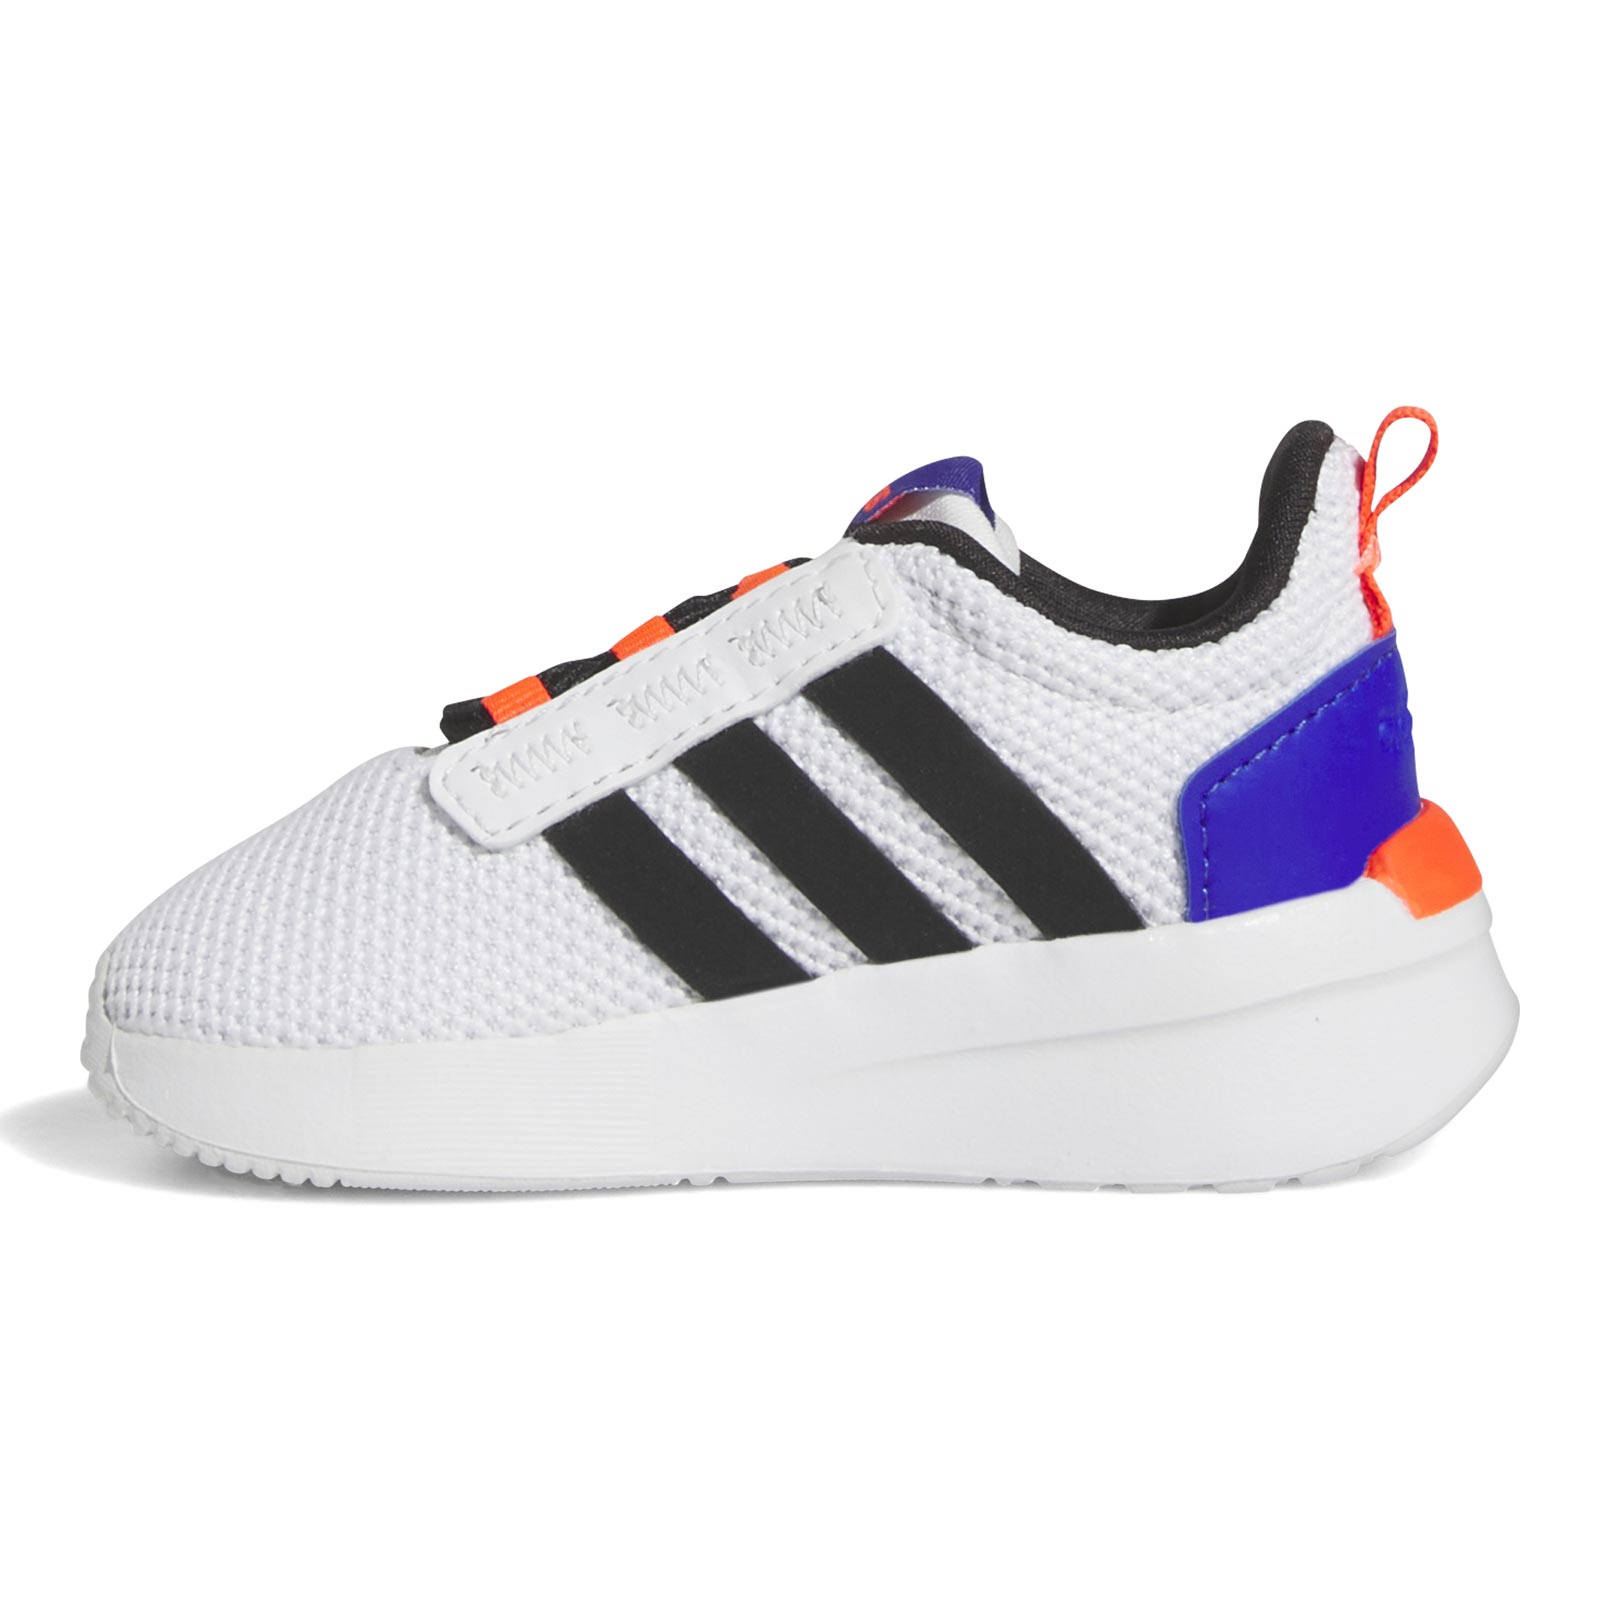 adidas Racer TR21 Infant Shoes